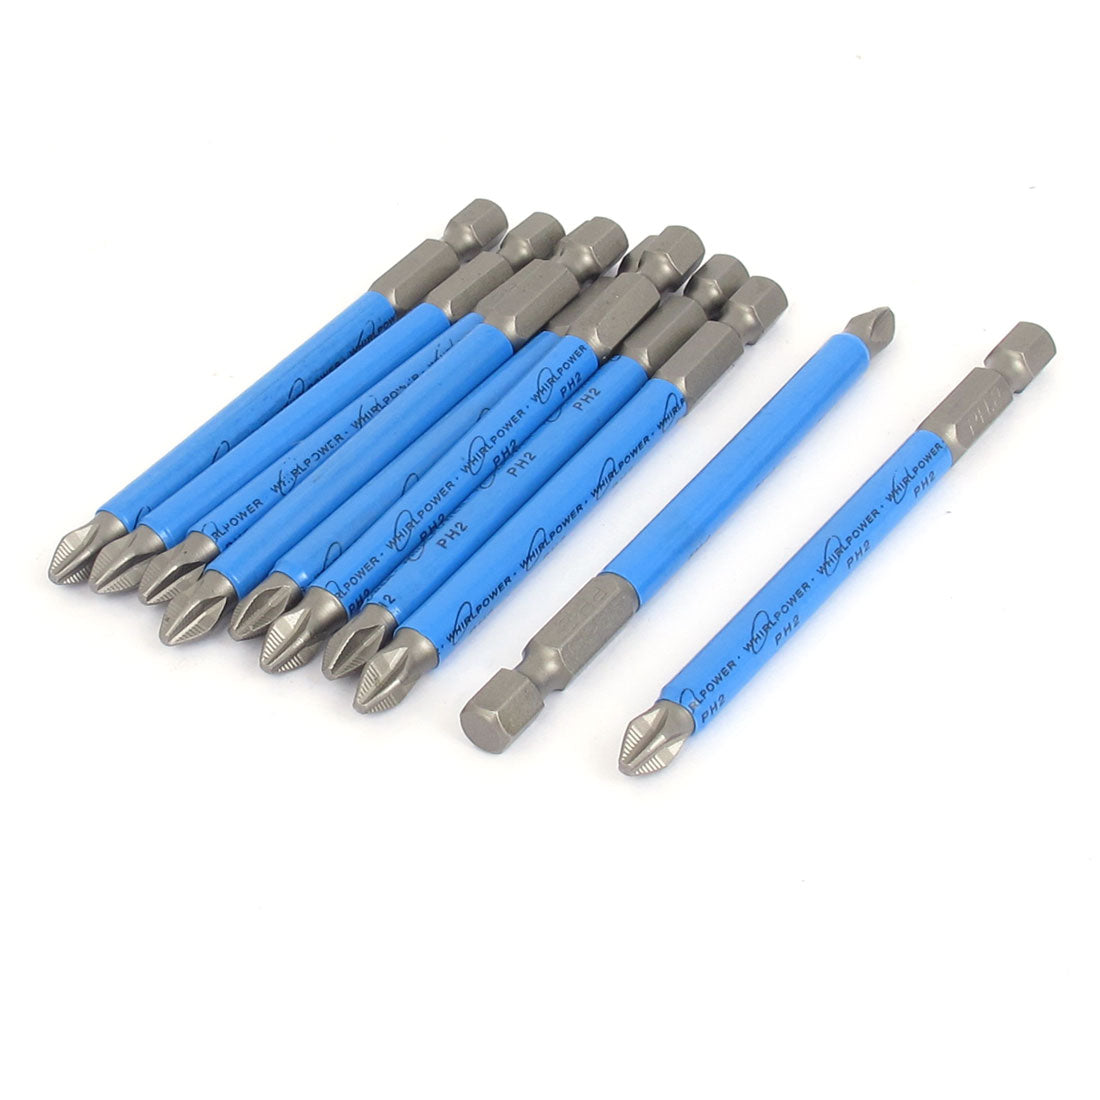 uxcell Uxcell 10 Pcs 1/4" Hex Shank S2 Steel Magnetic 6mm PH2 Phillips Screwdriver Bits 90mm